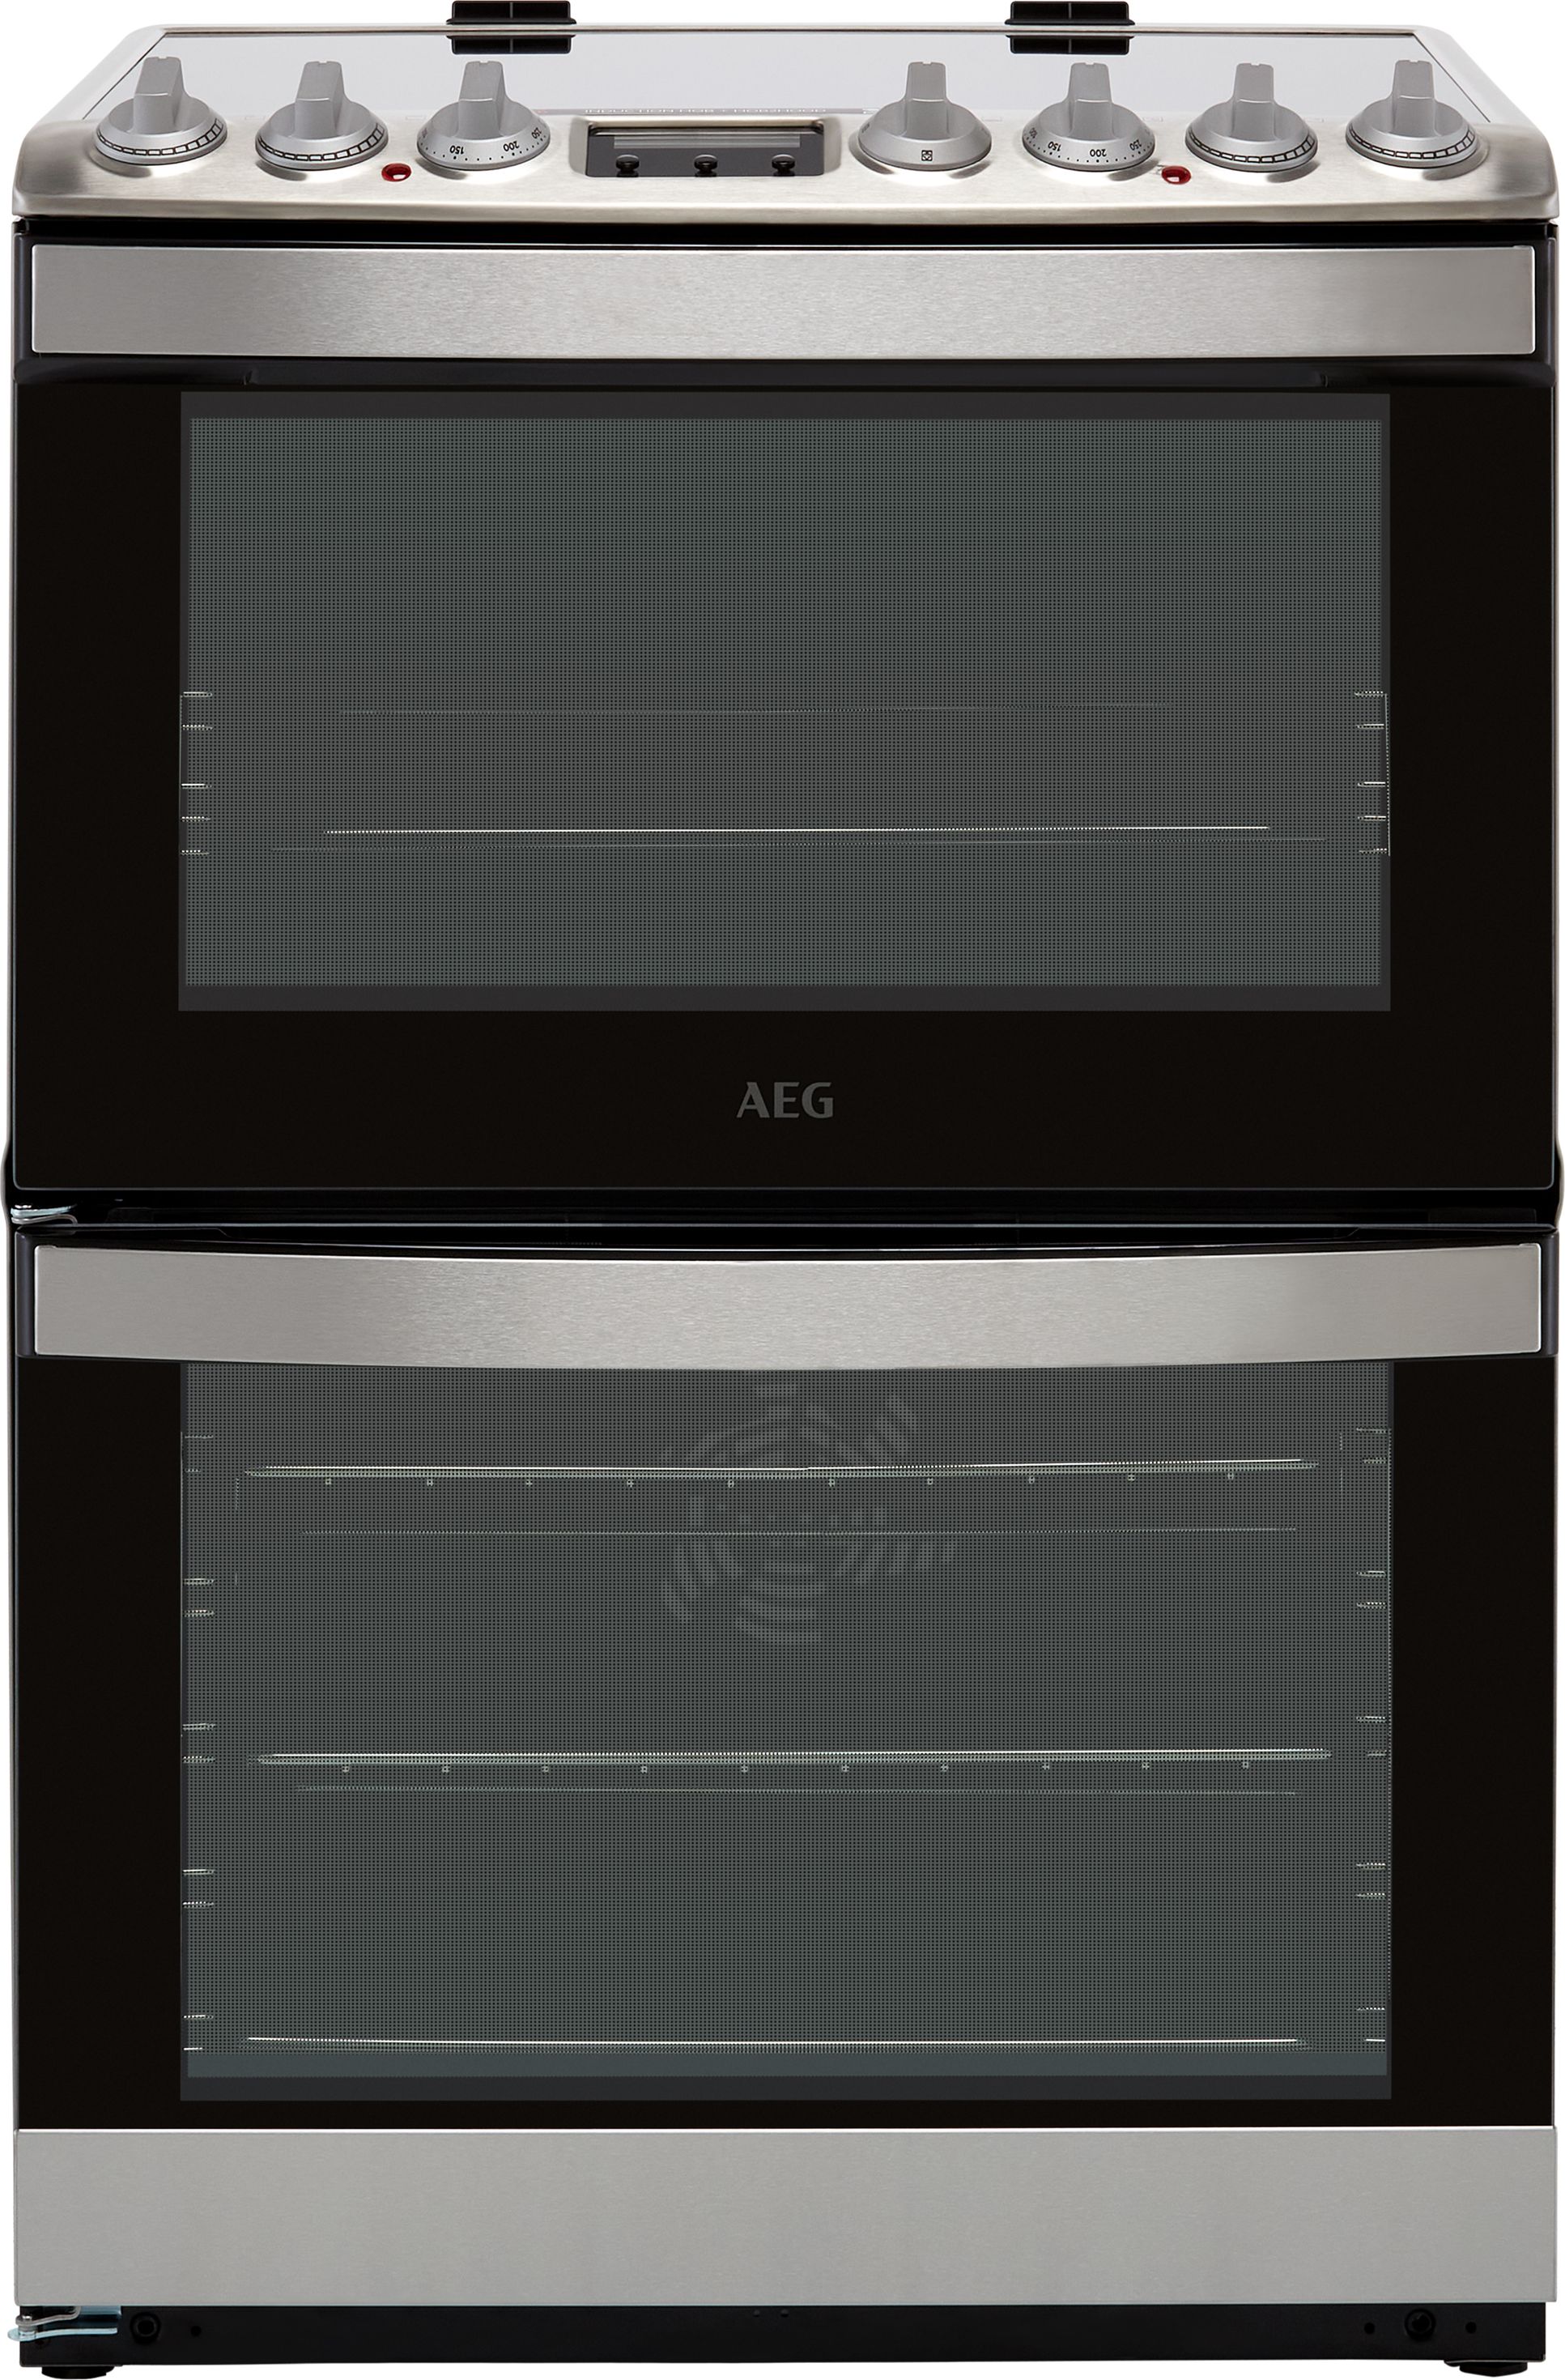 AEG 6000 SteamBake CIB6732ACM 60cm Electric Cooker with Induction Hob - Stainless Steel - A/A Rated, Stainless Steel